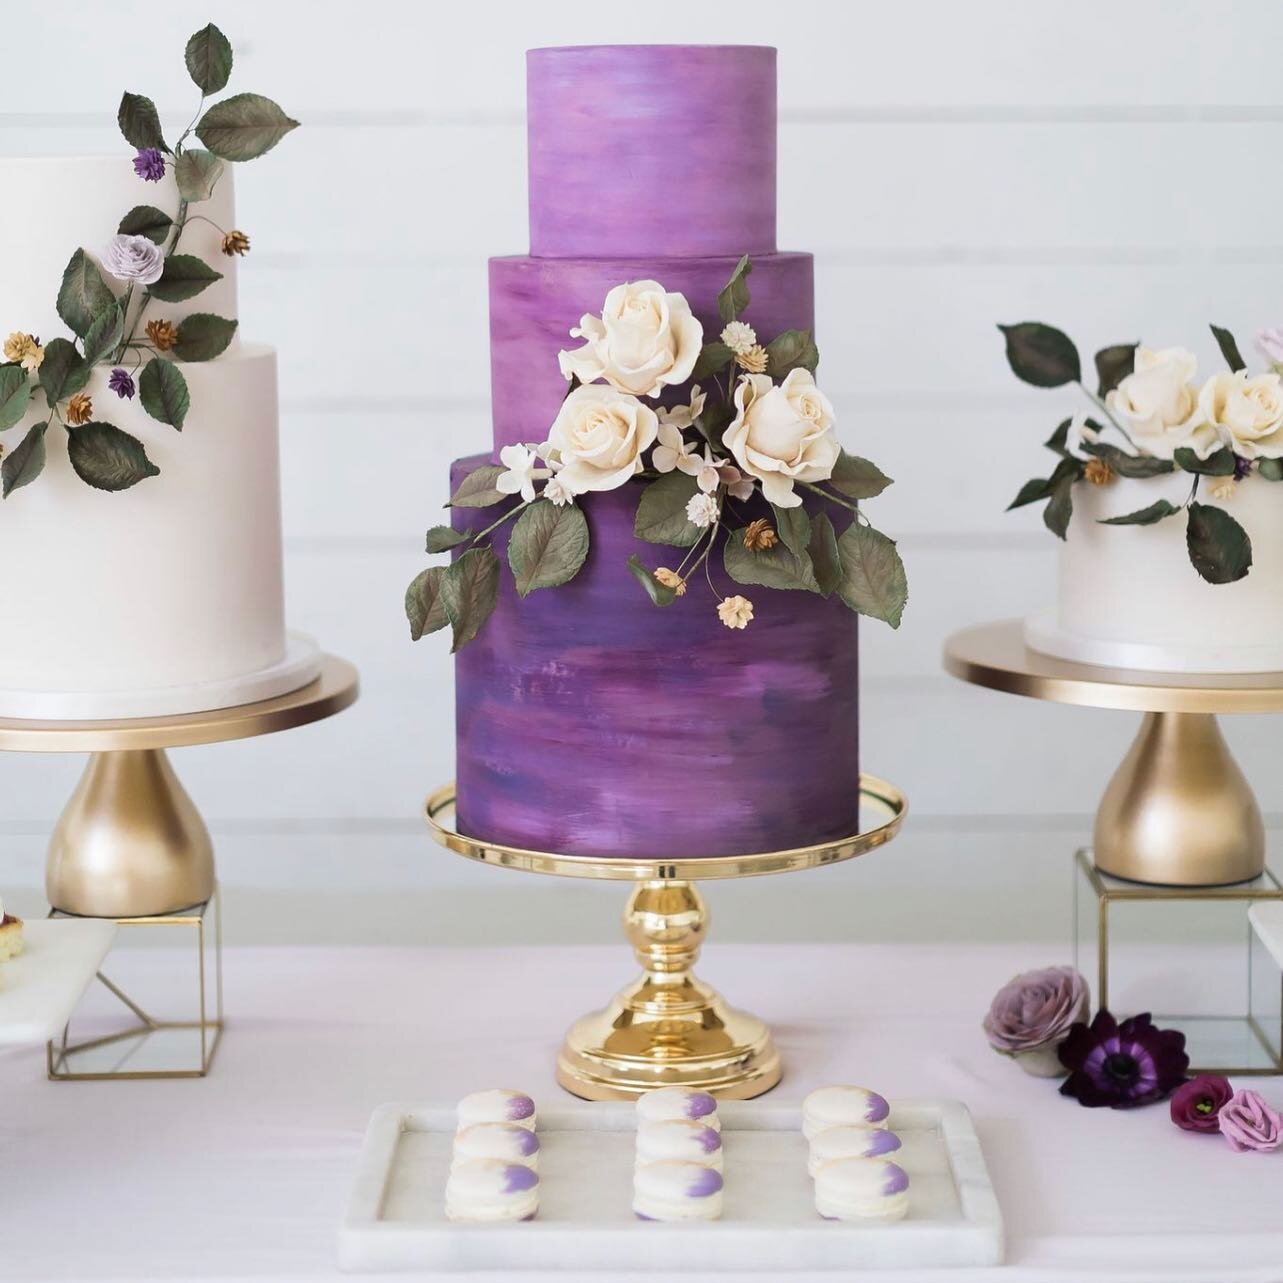 So much vibrancy and so much to love about this stinkin dessert table. Can we please just talk about the SUGAR FLOWERS on this cake by @icedcakesatx 

photo @laceylynnseymourphoto 
desserts @icedcakesatx 
displays + styling @melodysjoy